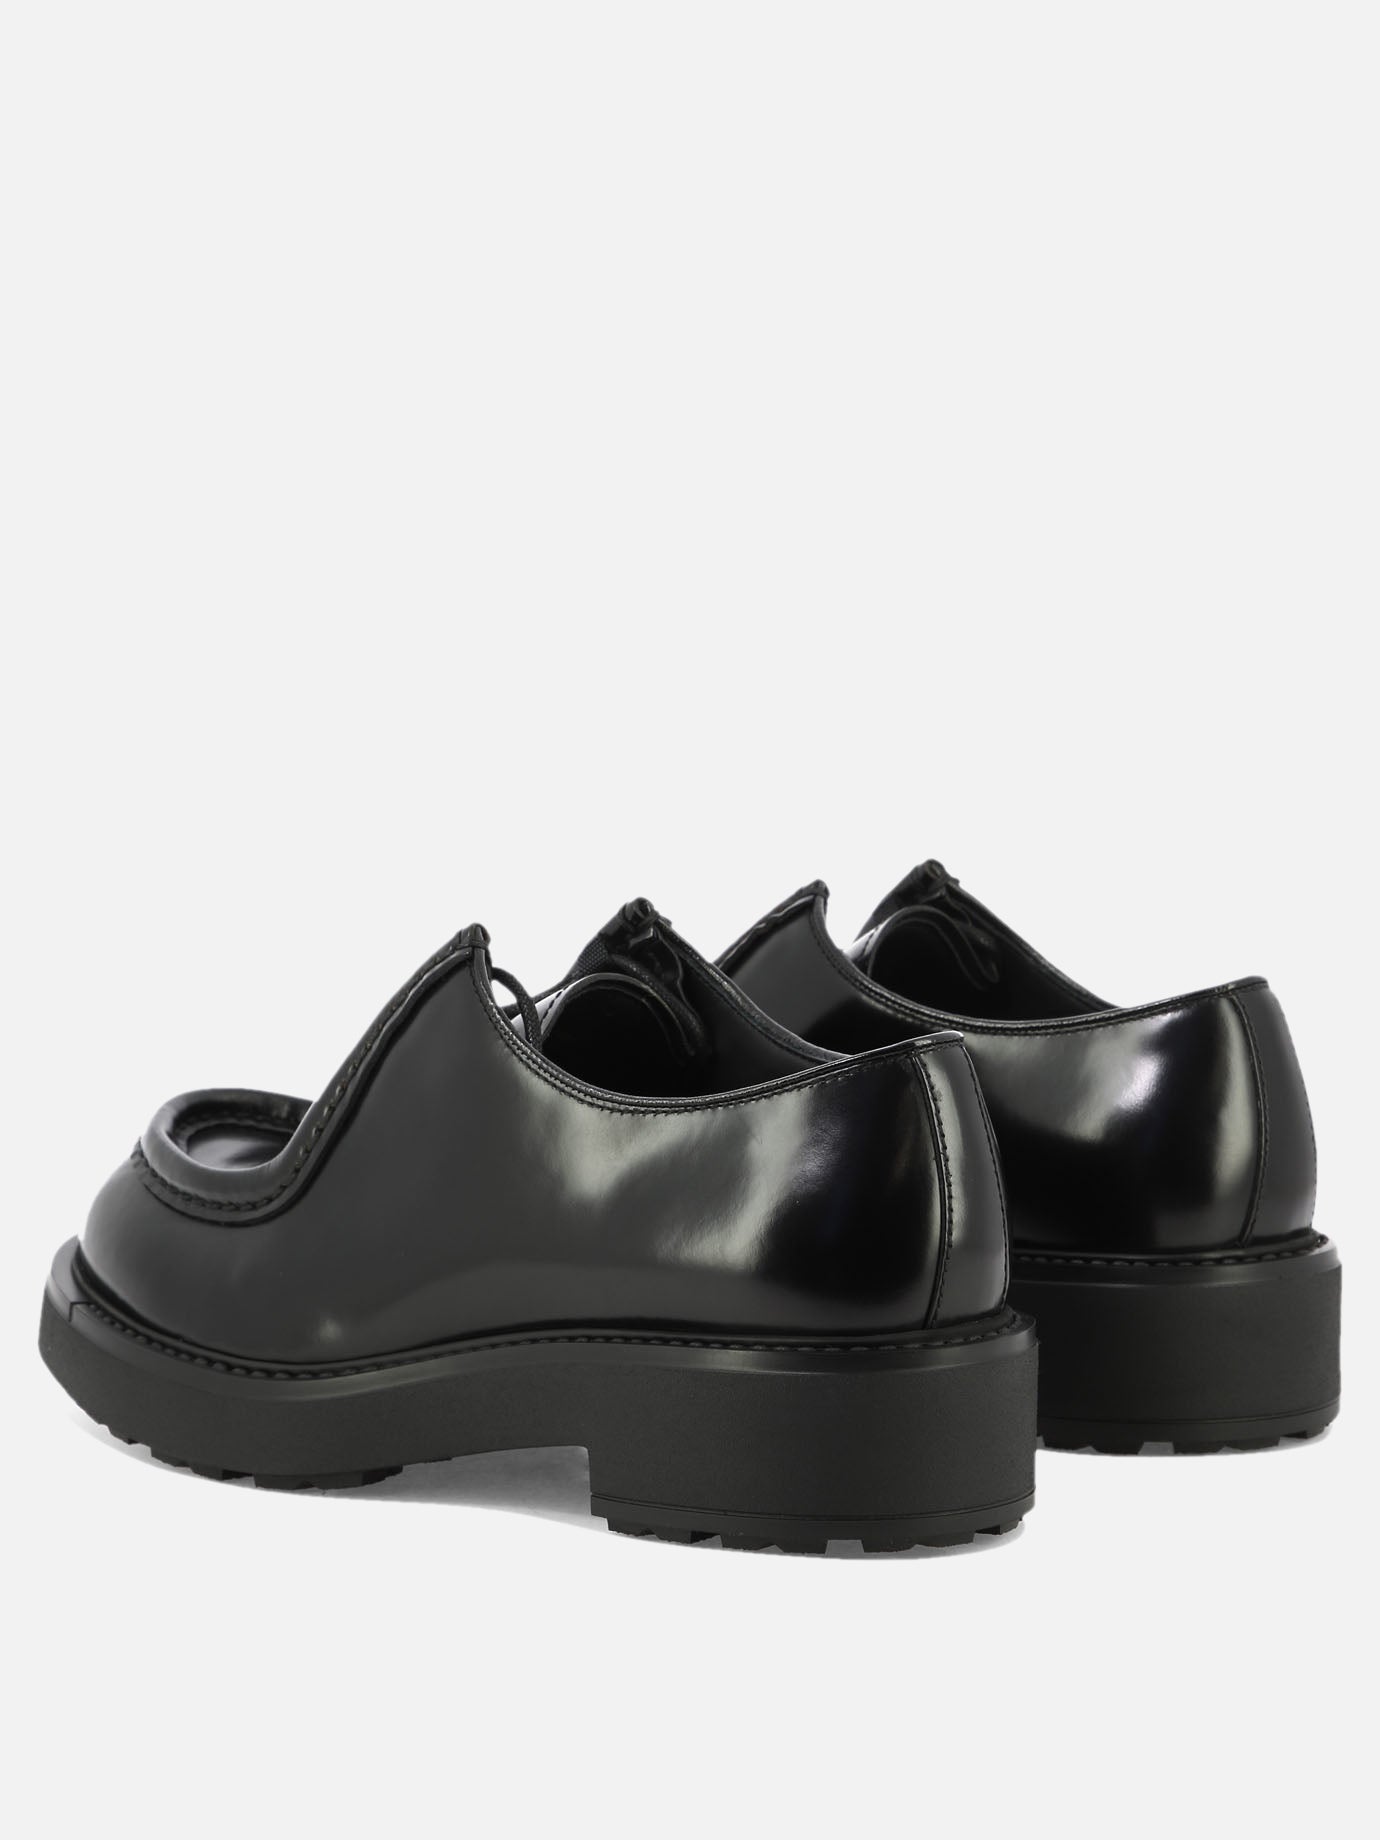 Opaque brushed leather lace-up shoes